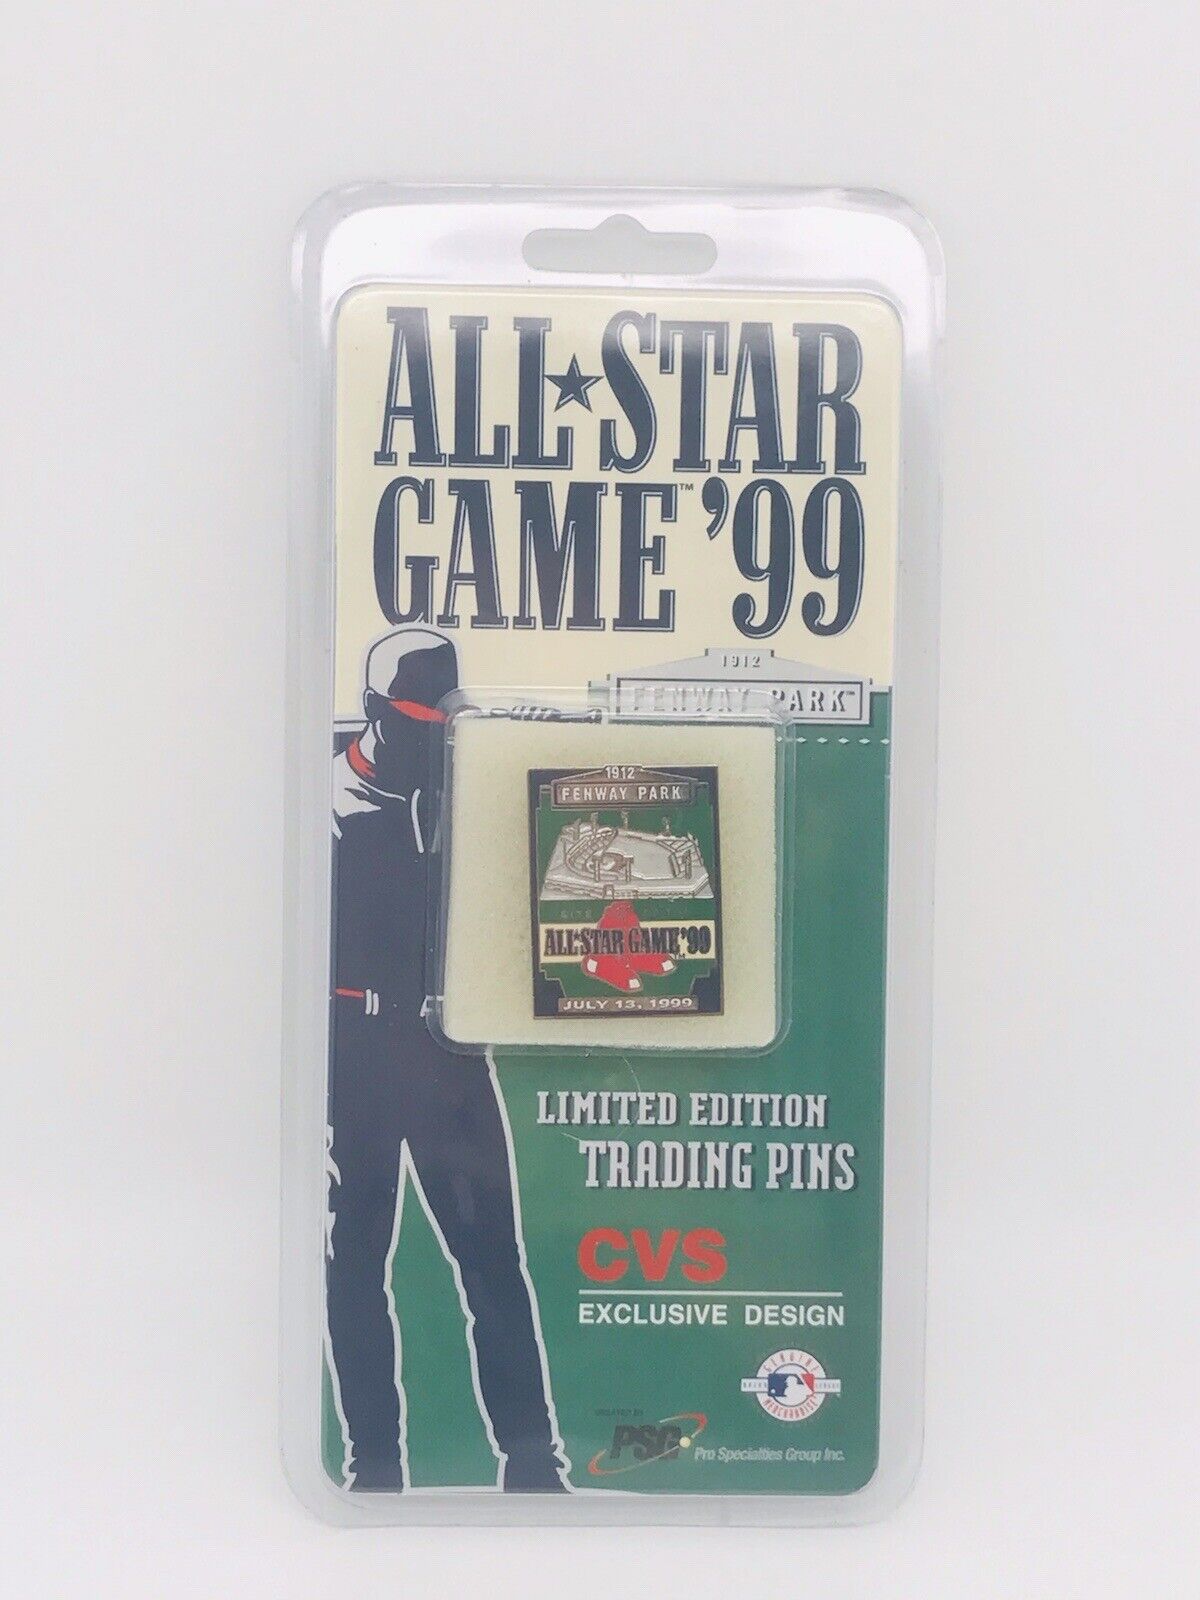 All⭐️Star Game ’99 pins 1998  Specialties Group Inc PSG …95